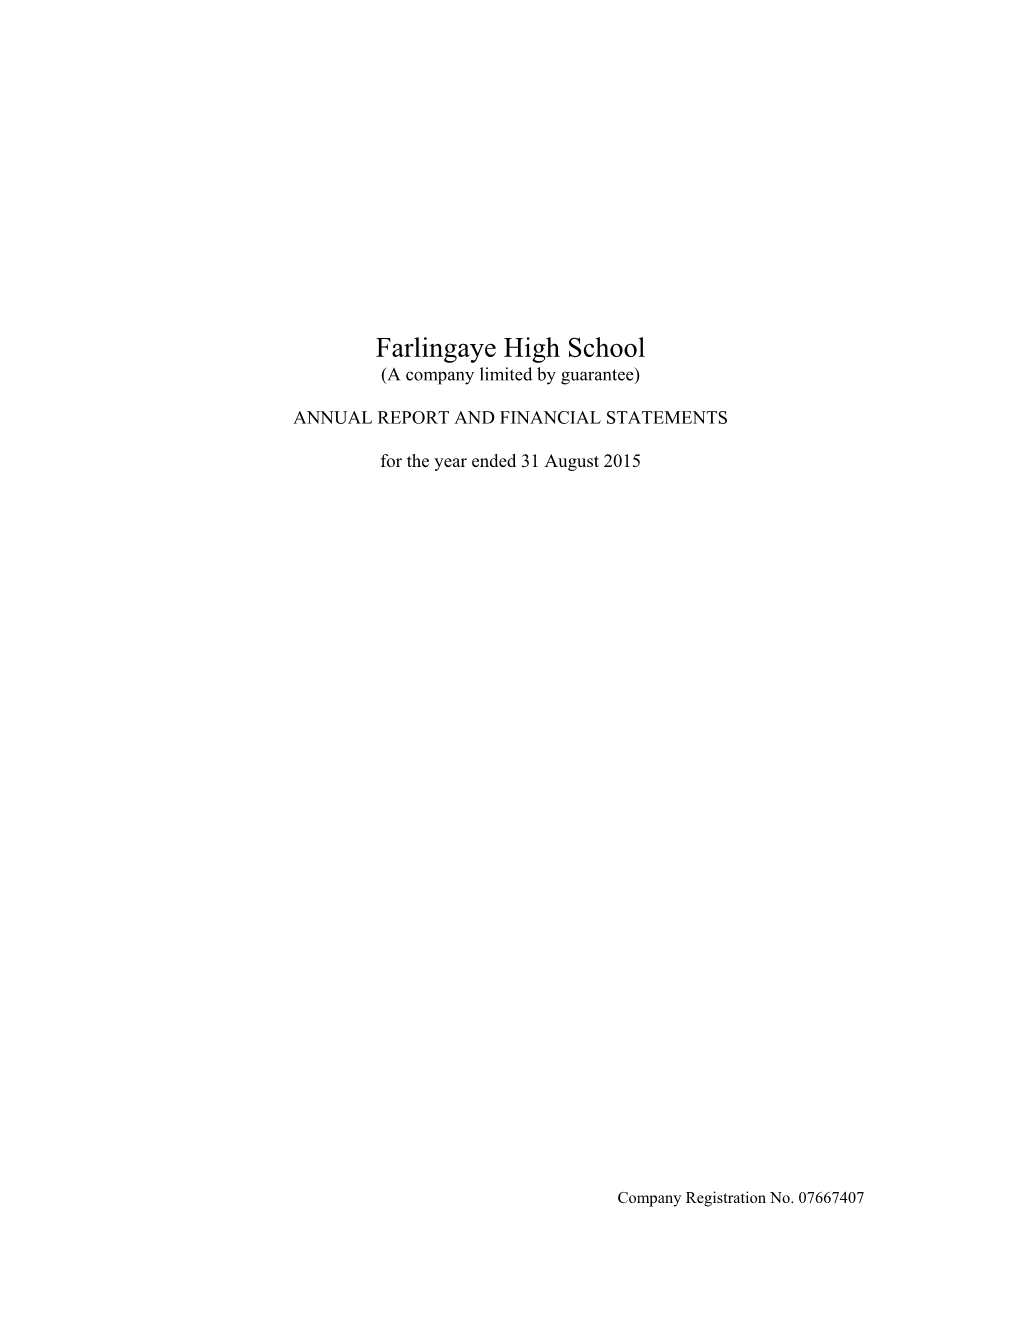 FHS Annual Report and Financial Statement